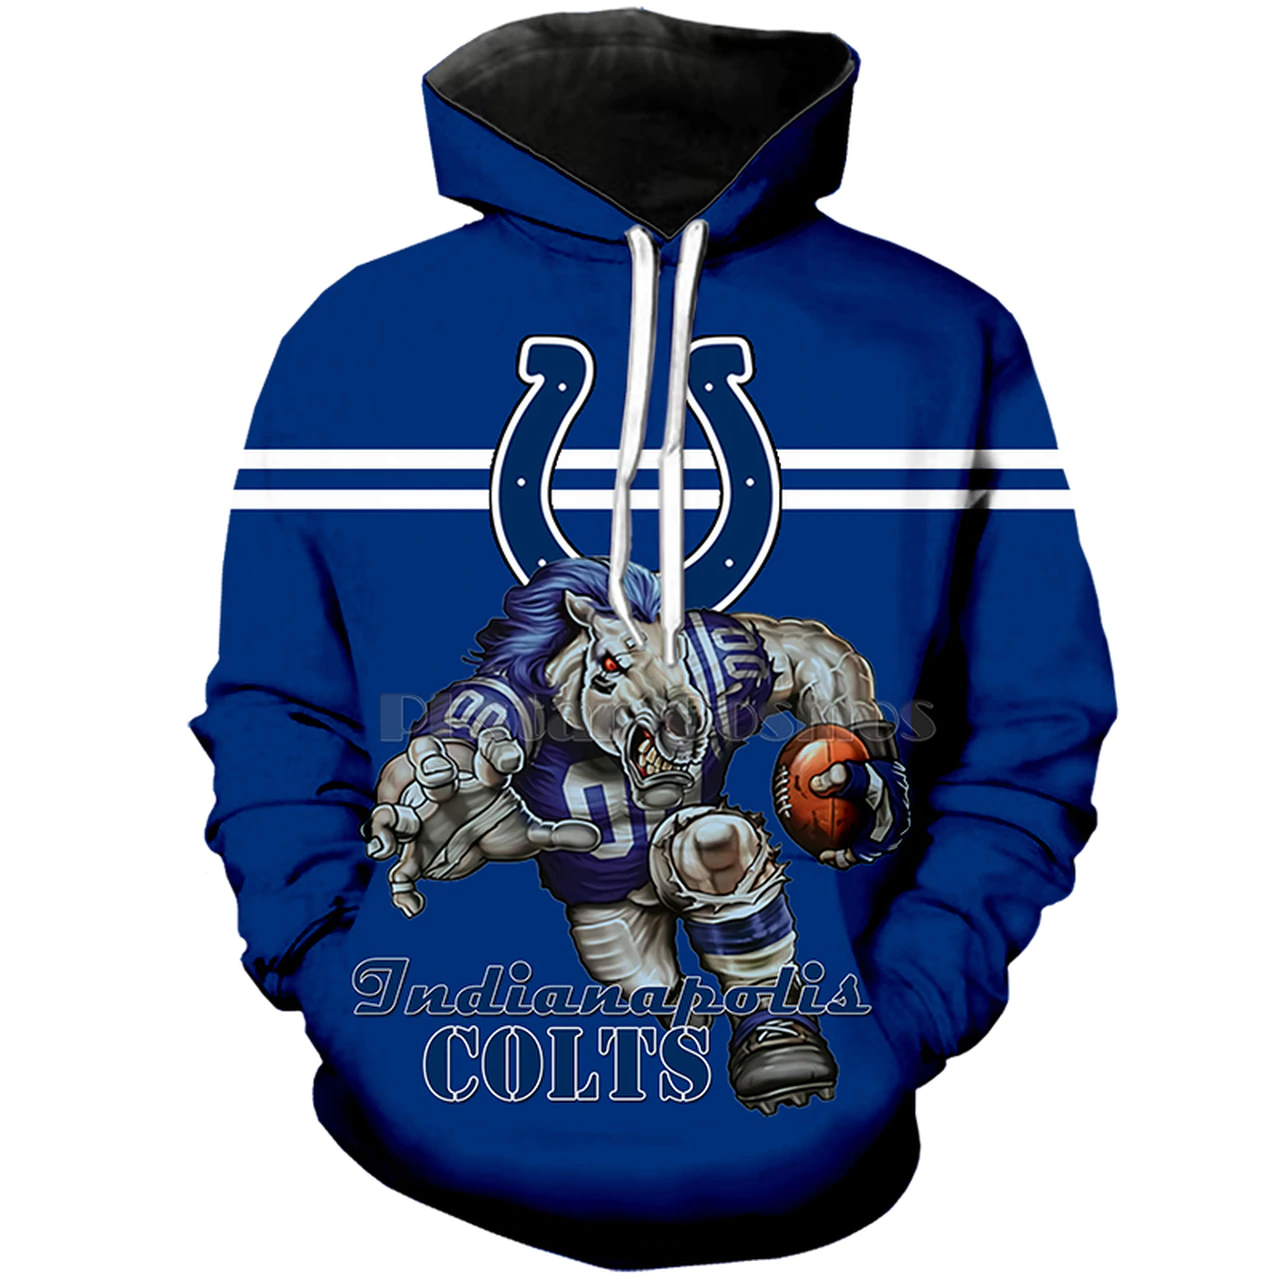 INDIANAPOLIS COLTS 3D HOODIE IICC010